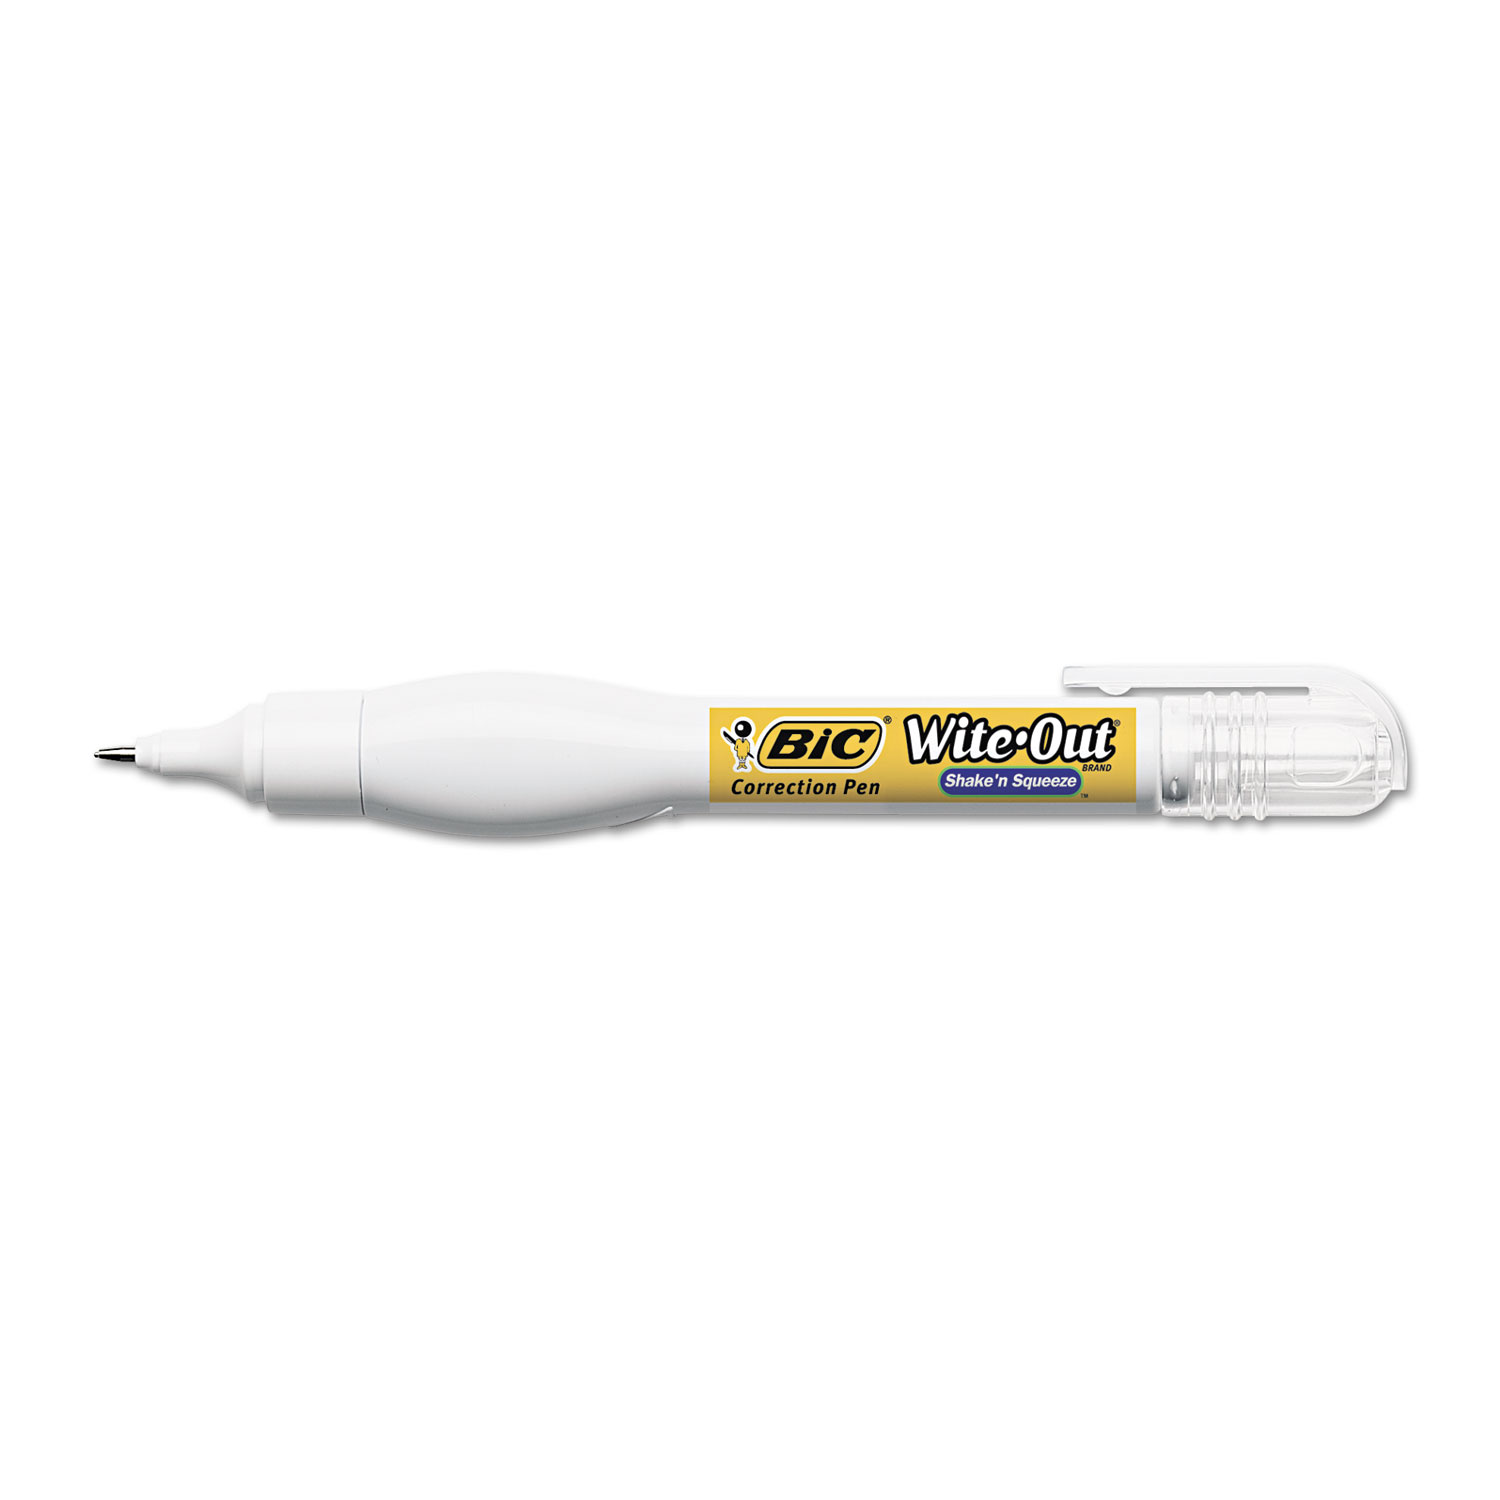  BIC WOSQP11 WHI Wite-Out Shake 'n Squeeze Correction Pen, 8 mL, White (BICWOSQP11) 